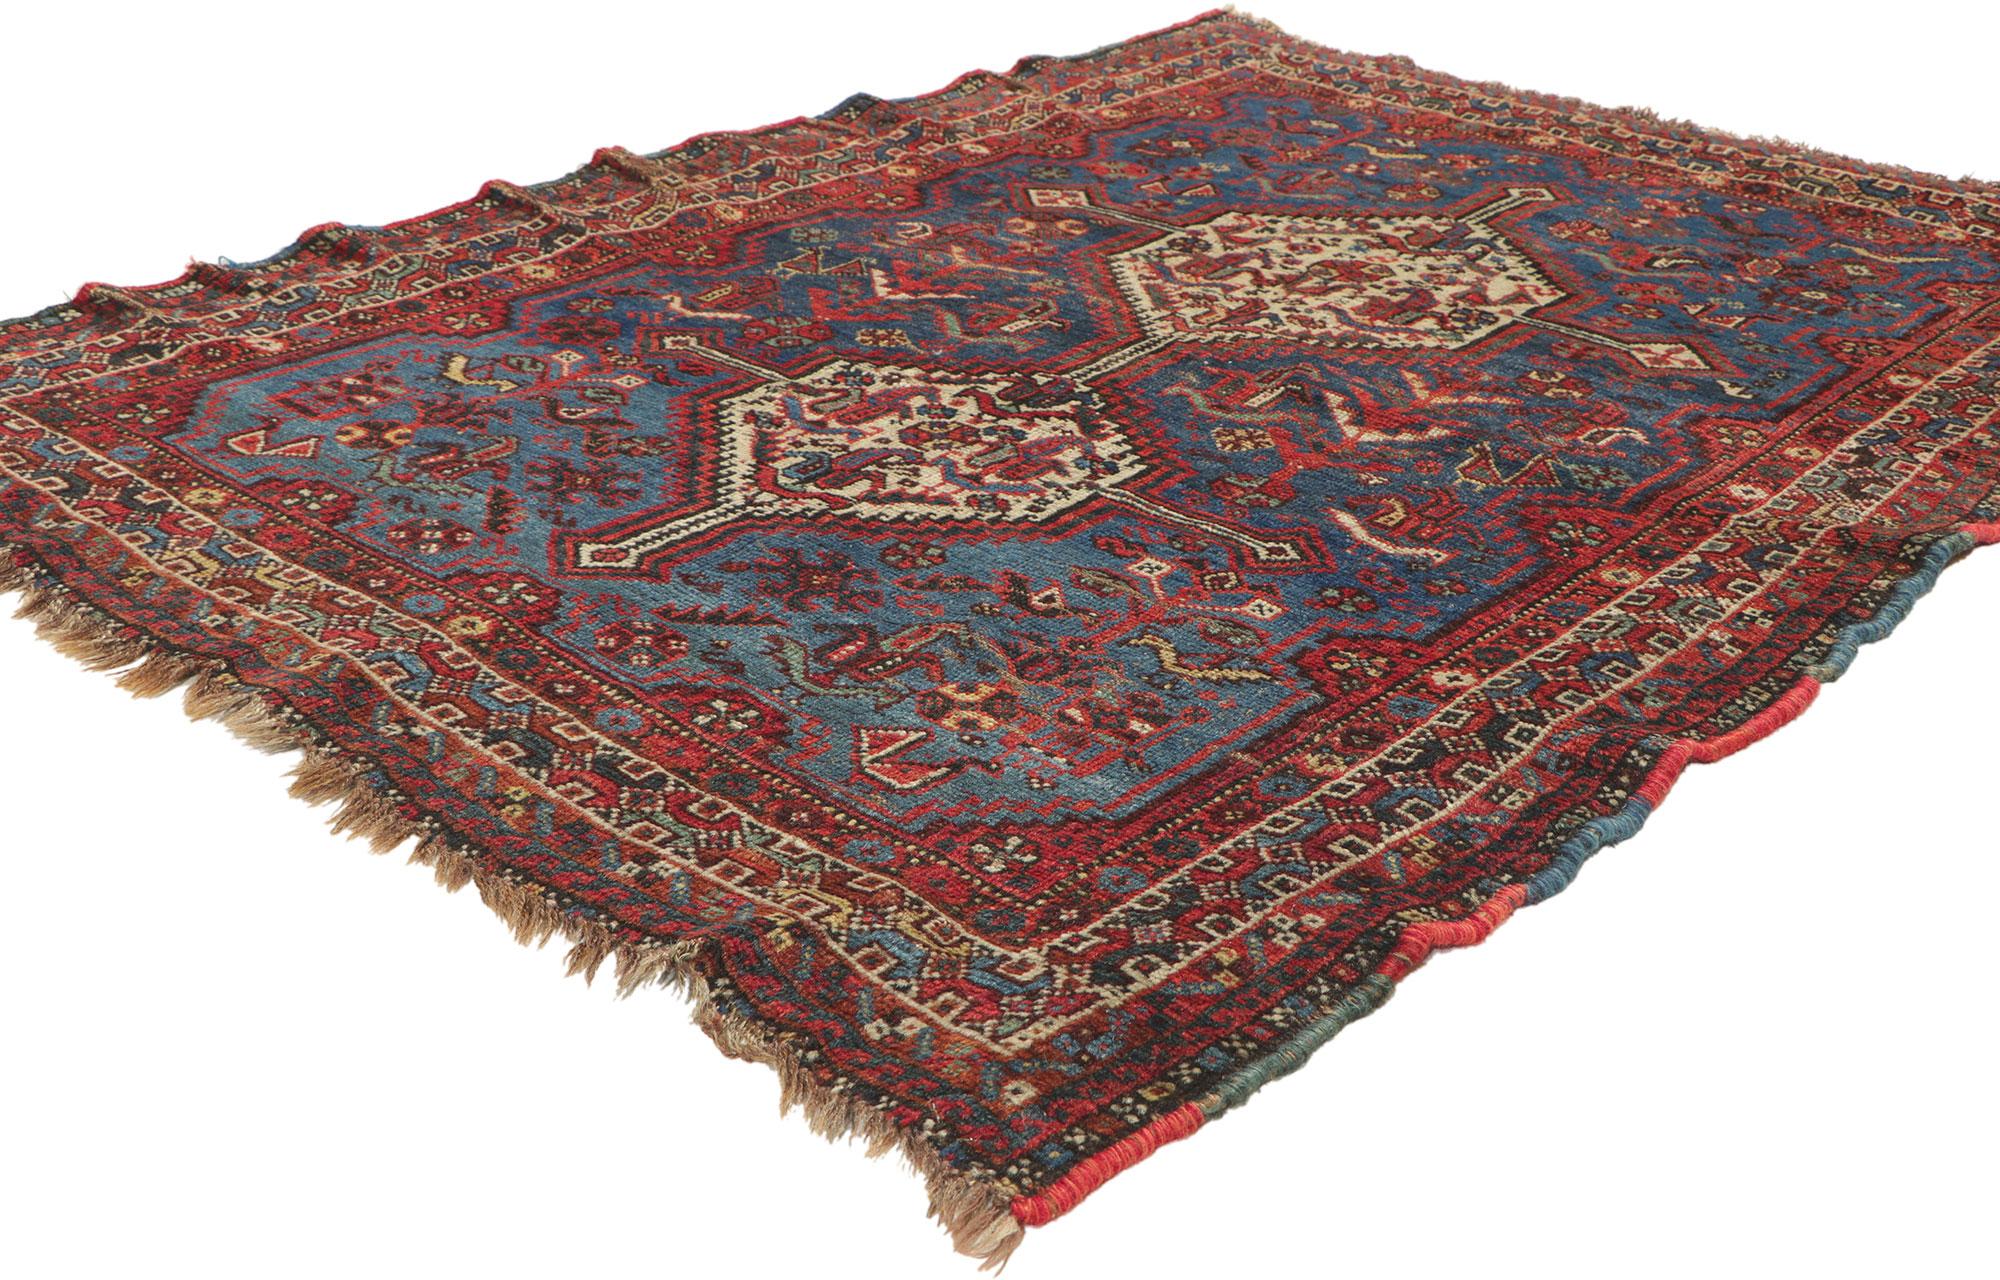 78519 Antique Persian Shiraz Rug, 03'07 x 04'10. Emanating nomadic charm with incredible detail and texture, this hand knotted wool antique Persian Shiraz rug is a captivating vision of woven beauty. The eye-catching tribal design and sophisticated